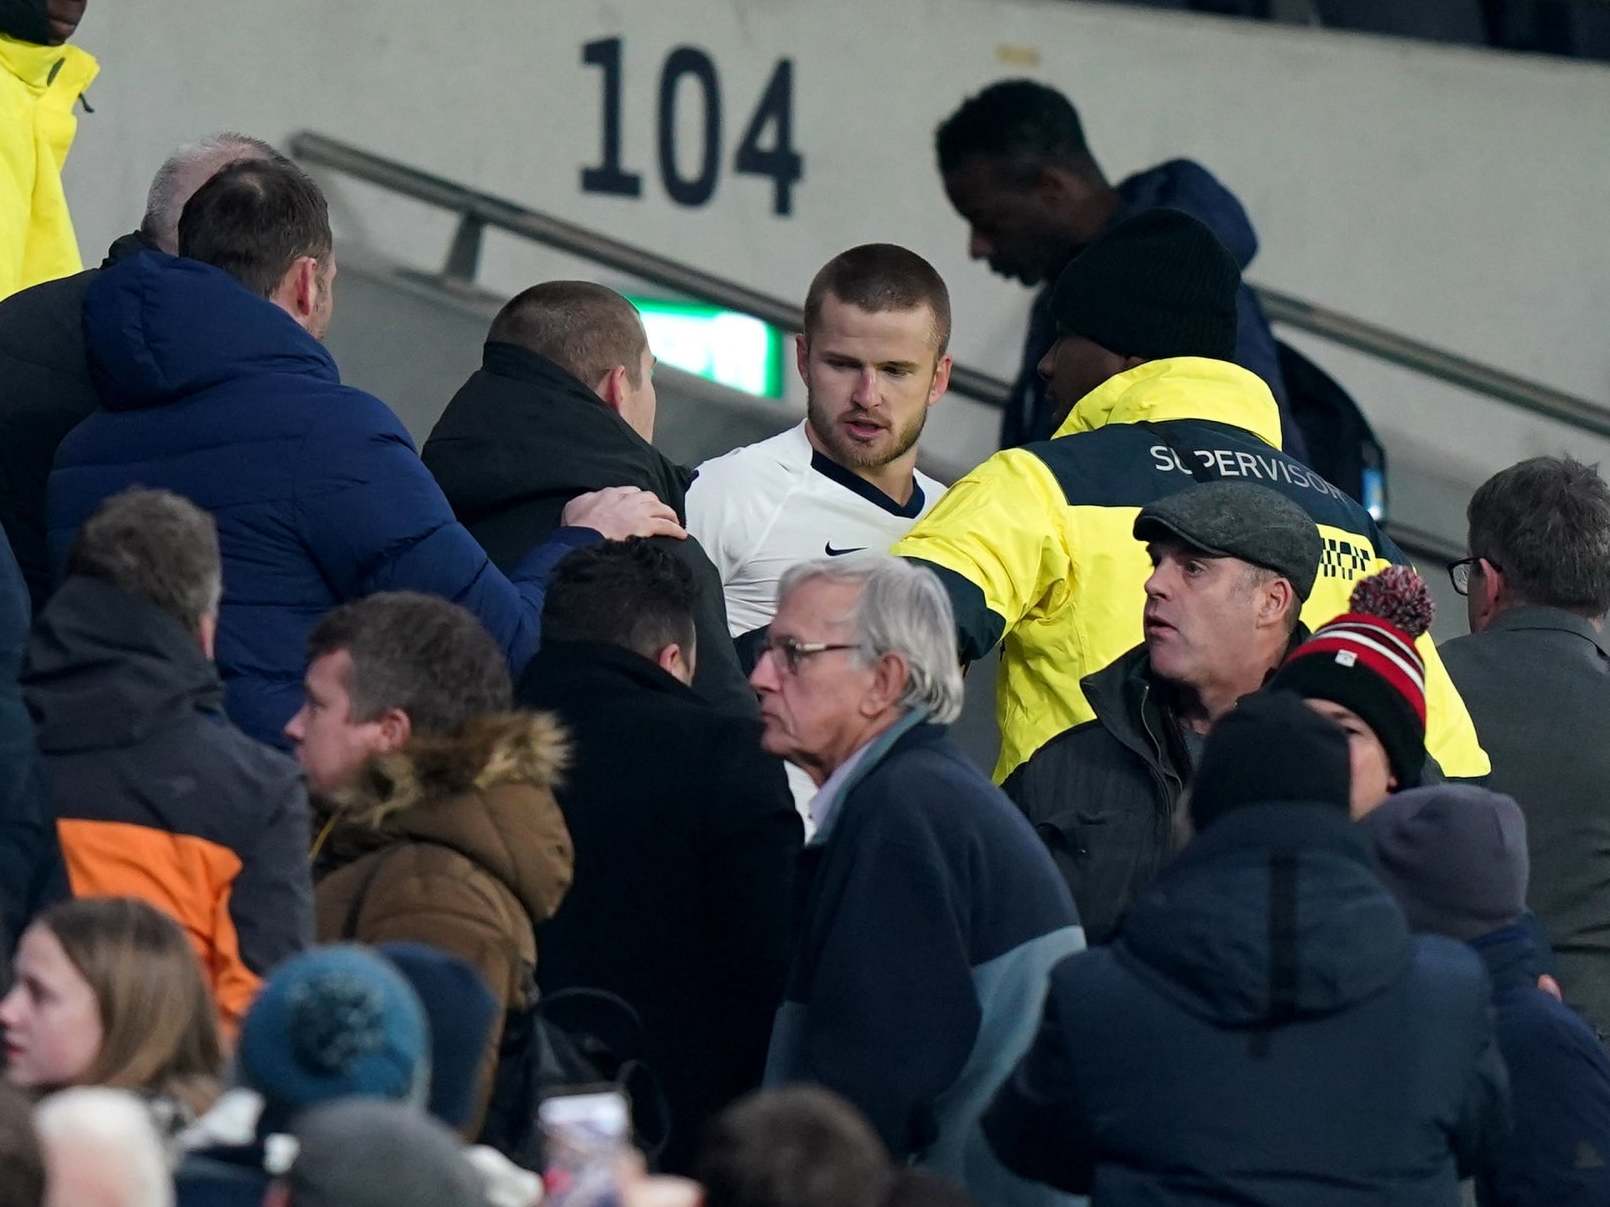 Tottenham Hotspur's Eric Dier confronts a supporter in the stands